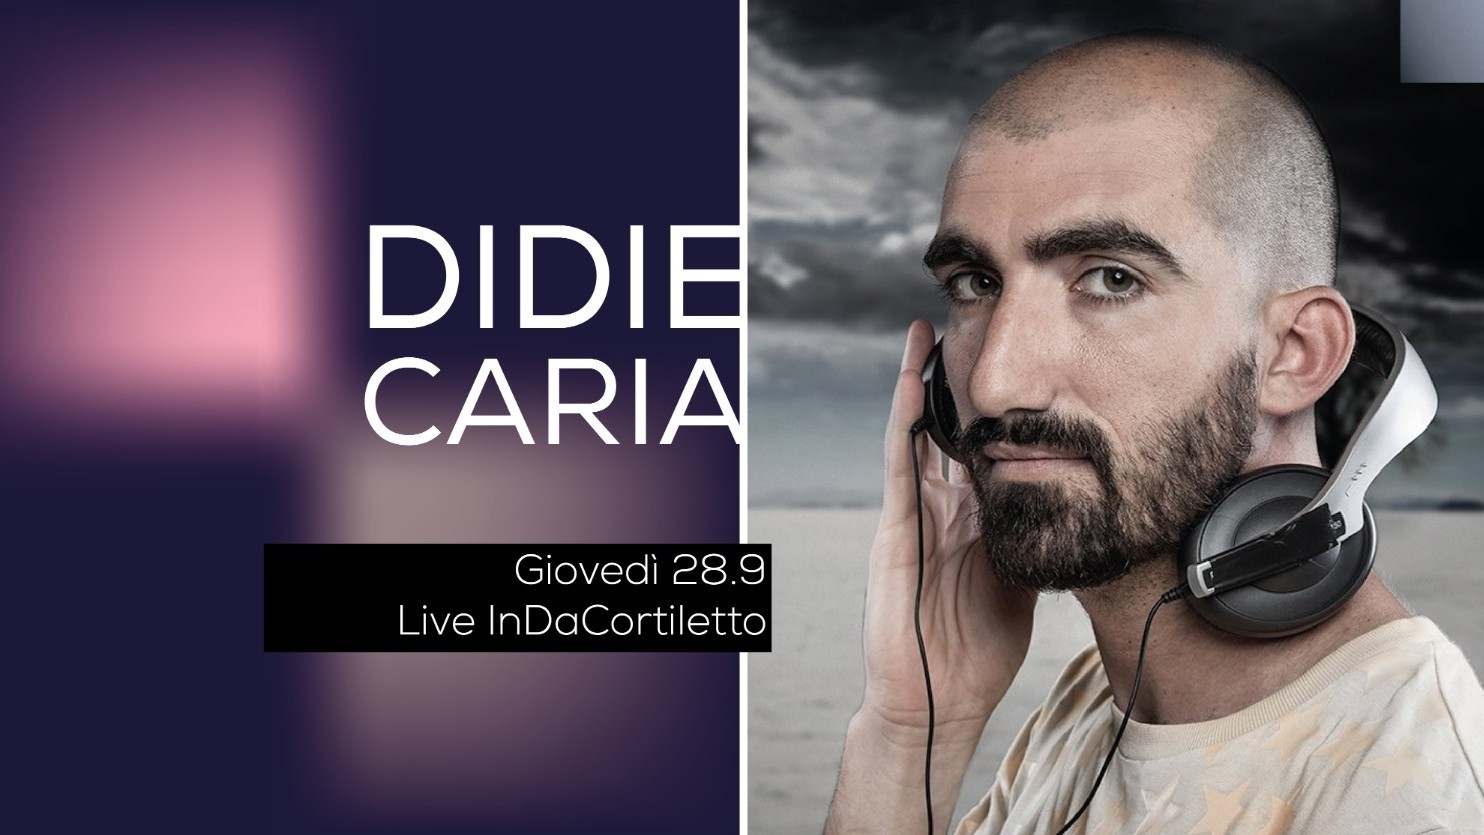 Didie Caria / InDaCortiletto